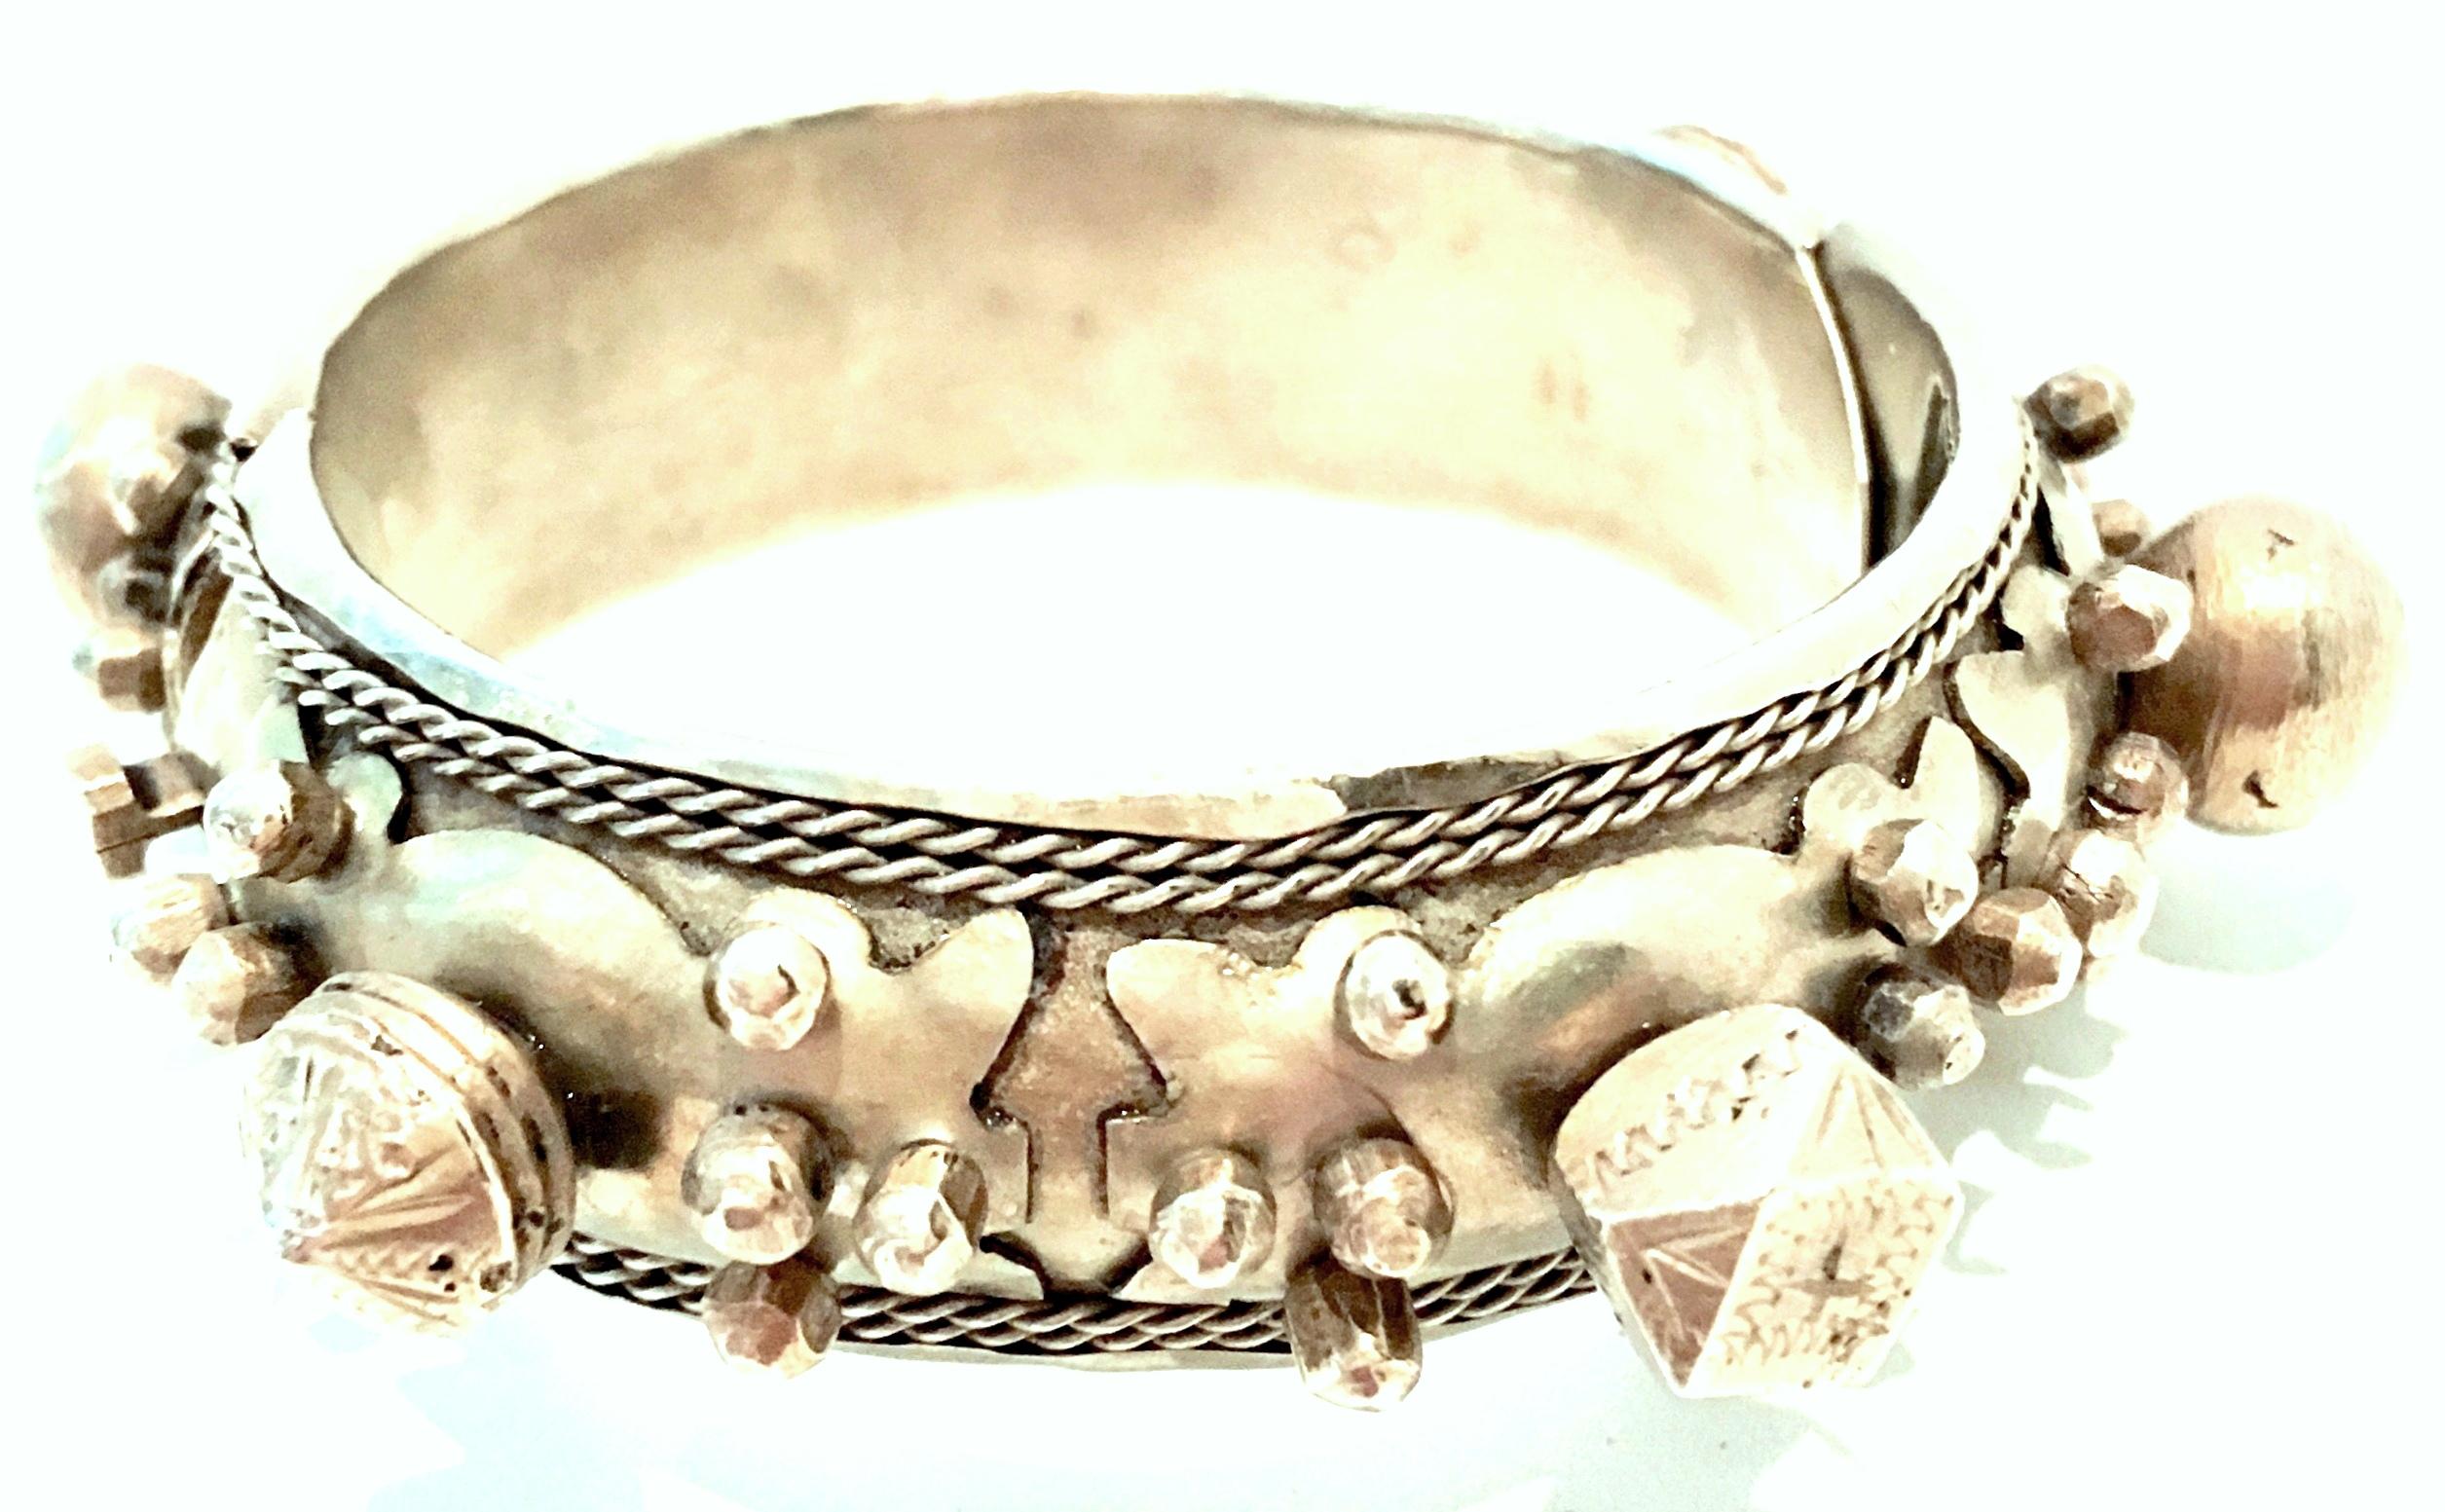 Mid-20th Century Rare Pair Of Old Silver Rajasthan Tribal Style Clamper Bangle Bracelets. These finely crafted and chunky bracelets feature a geometric raised and applied carved pattern. This pair of for the most part, identical bracelets have a